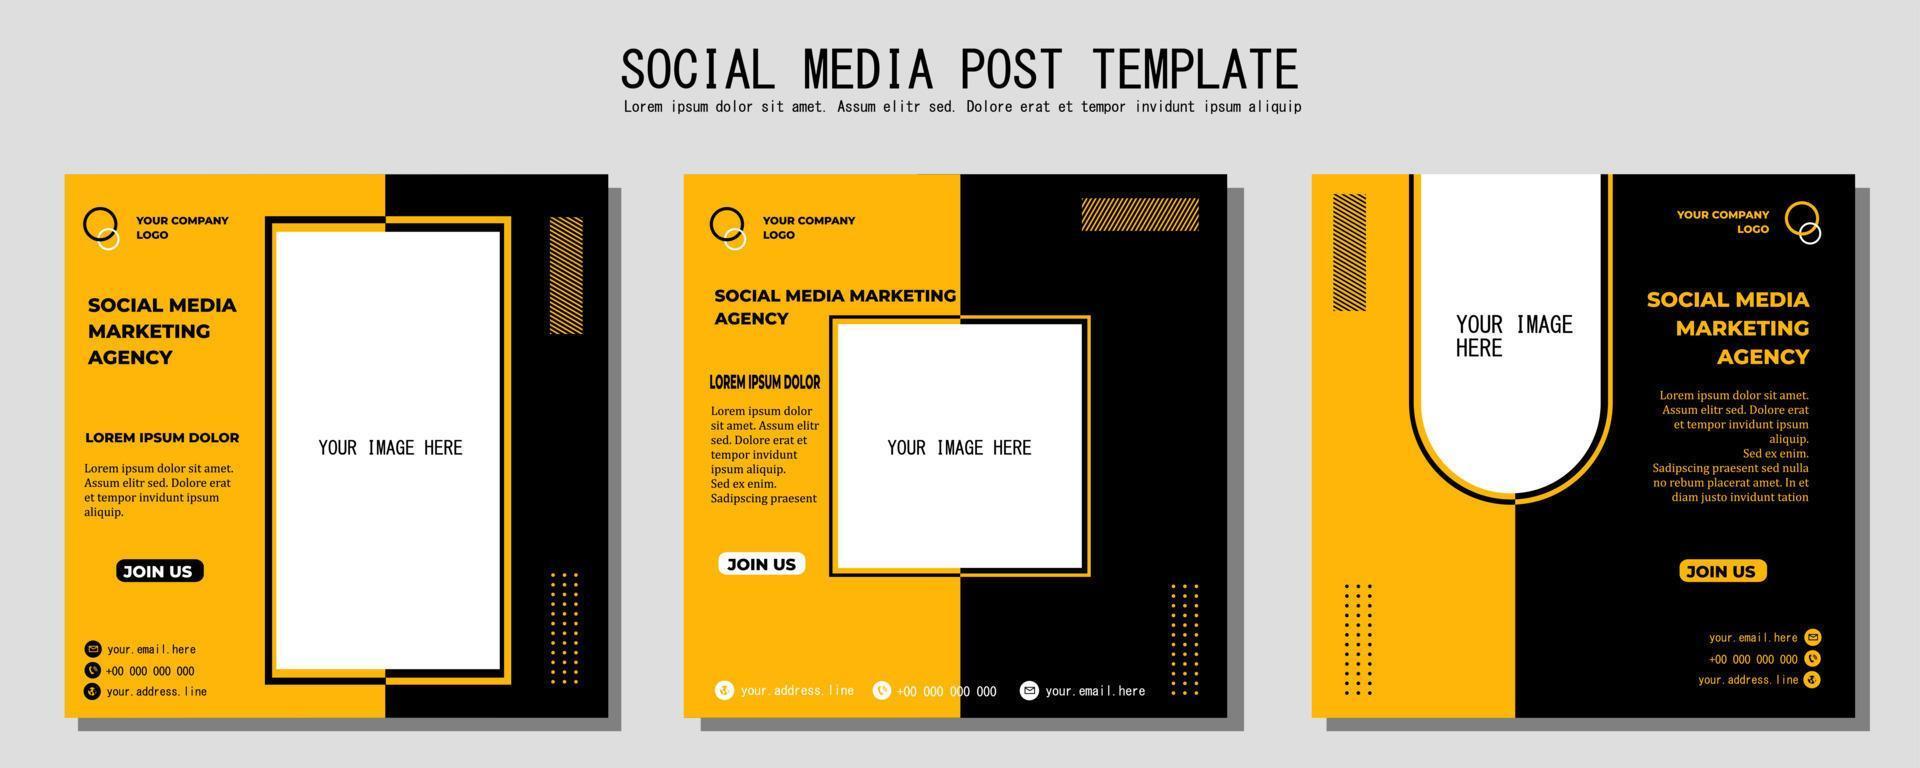 Yellow and Black Vector Social Media Post Template, vector art illustration and text, Simple and Elegant Design Full Color